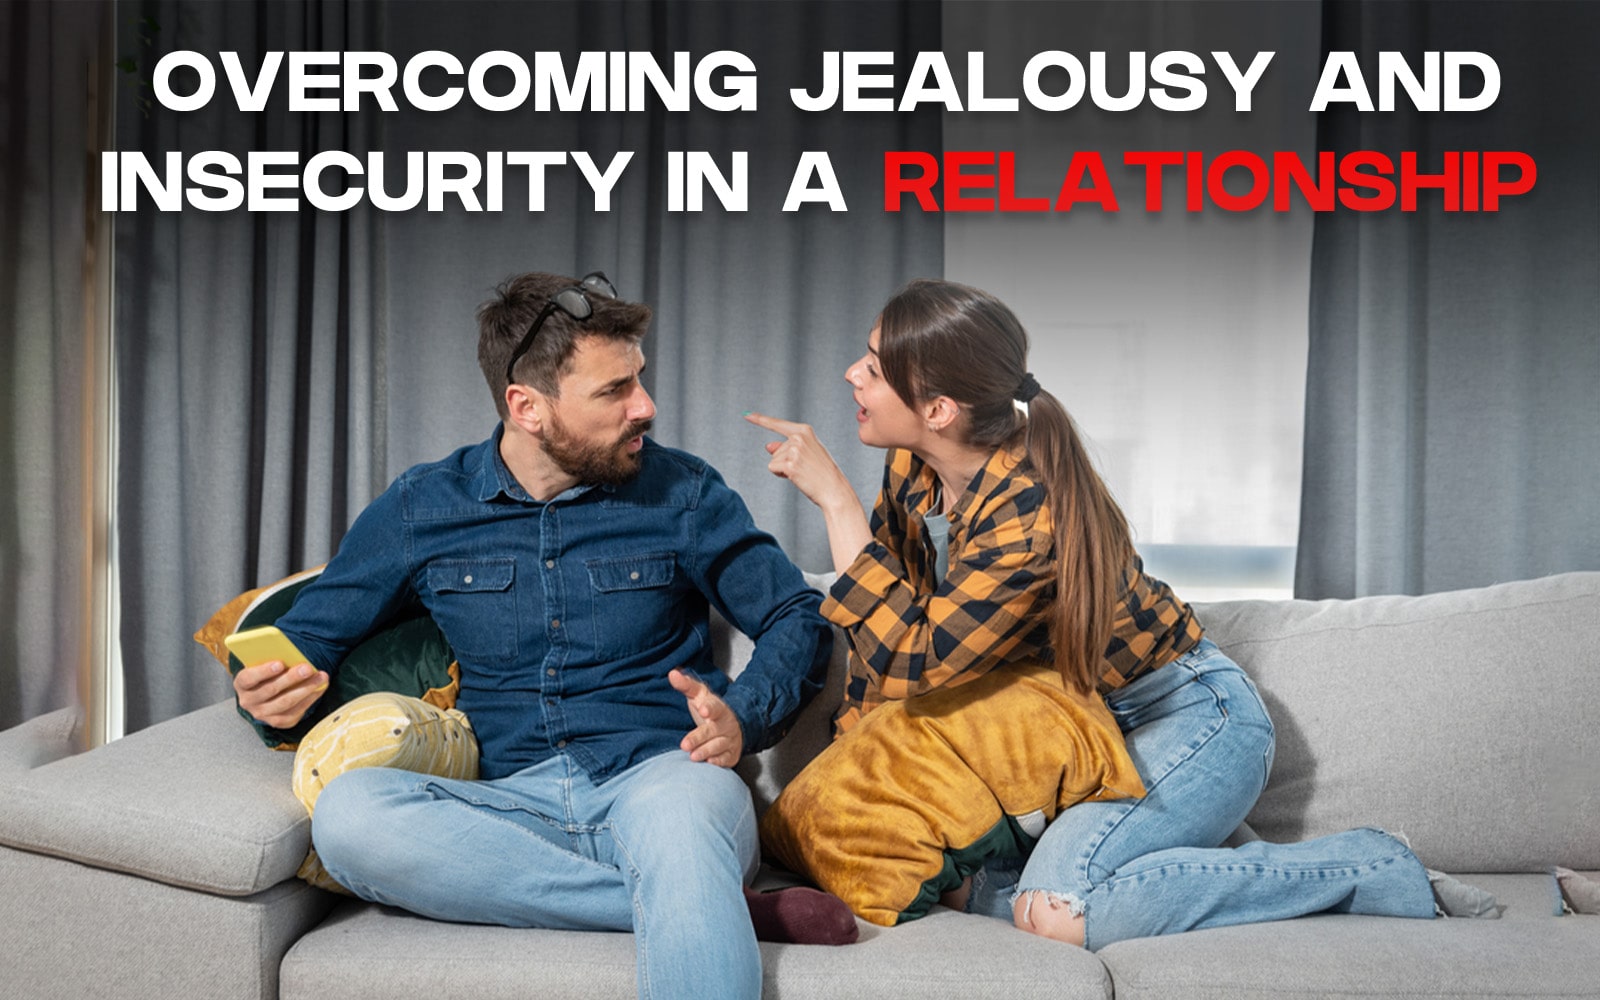 Overcoming Jealousy and Insecurity in a Relationship